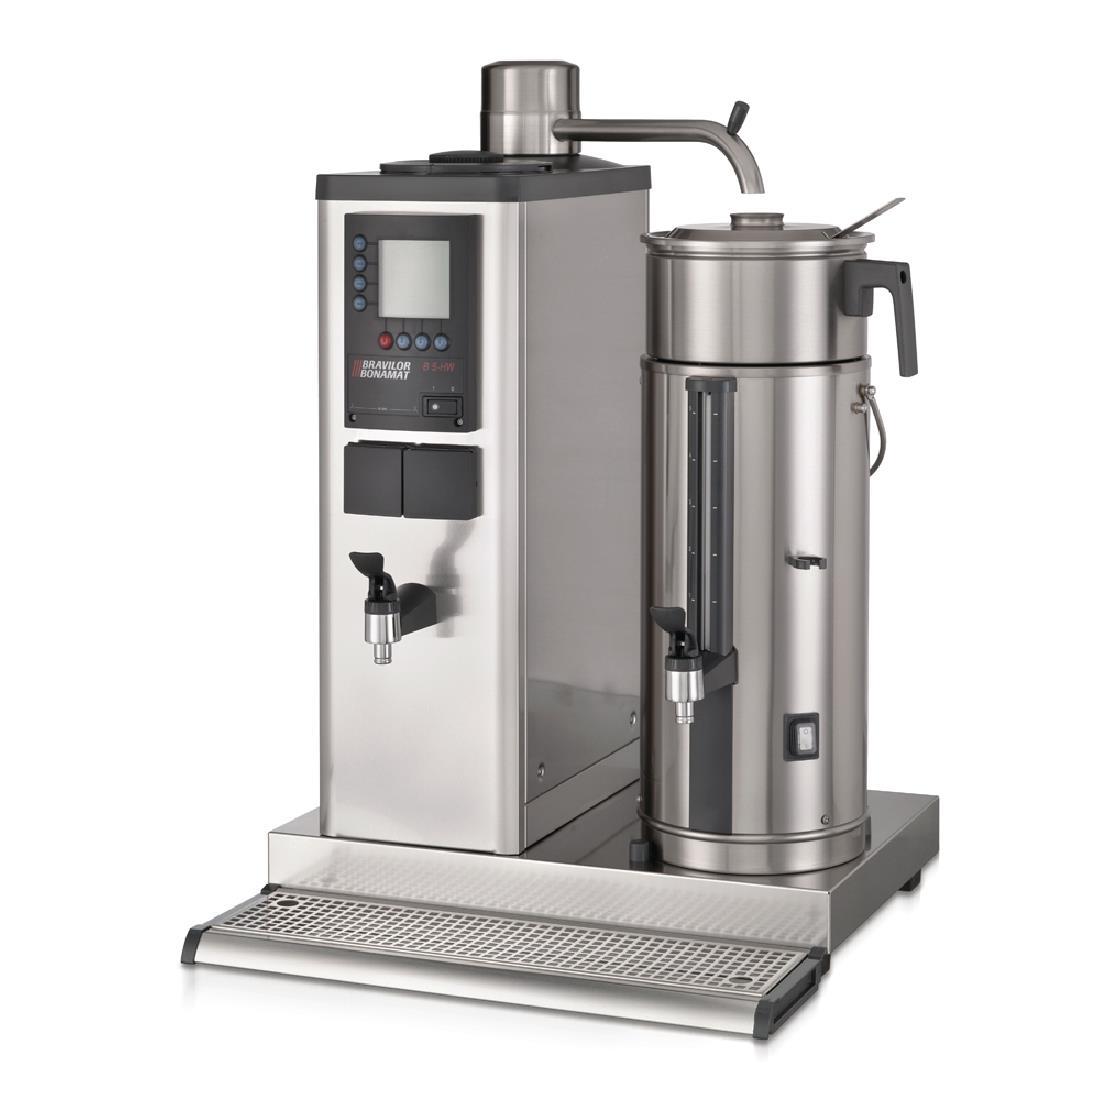 Bravilor B10 HWR Bulk Coffee Brewer with 10Ltr Coffee Urn and Hot Water Tap 3 Phase - DC689  - 1